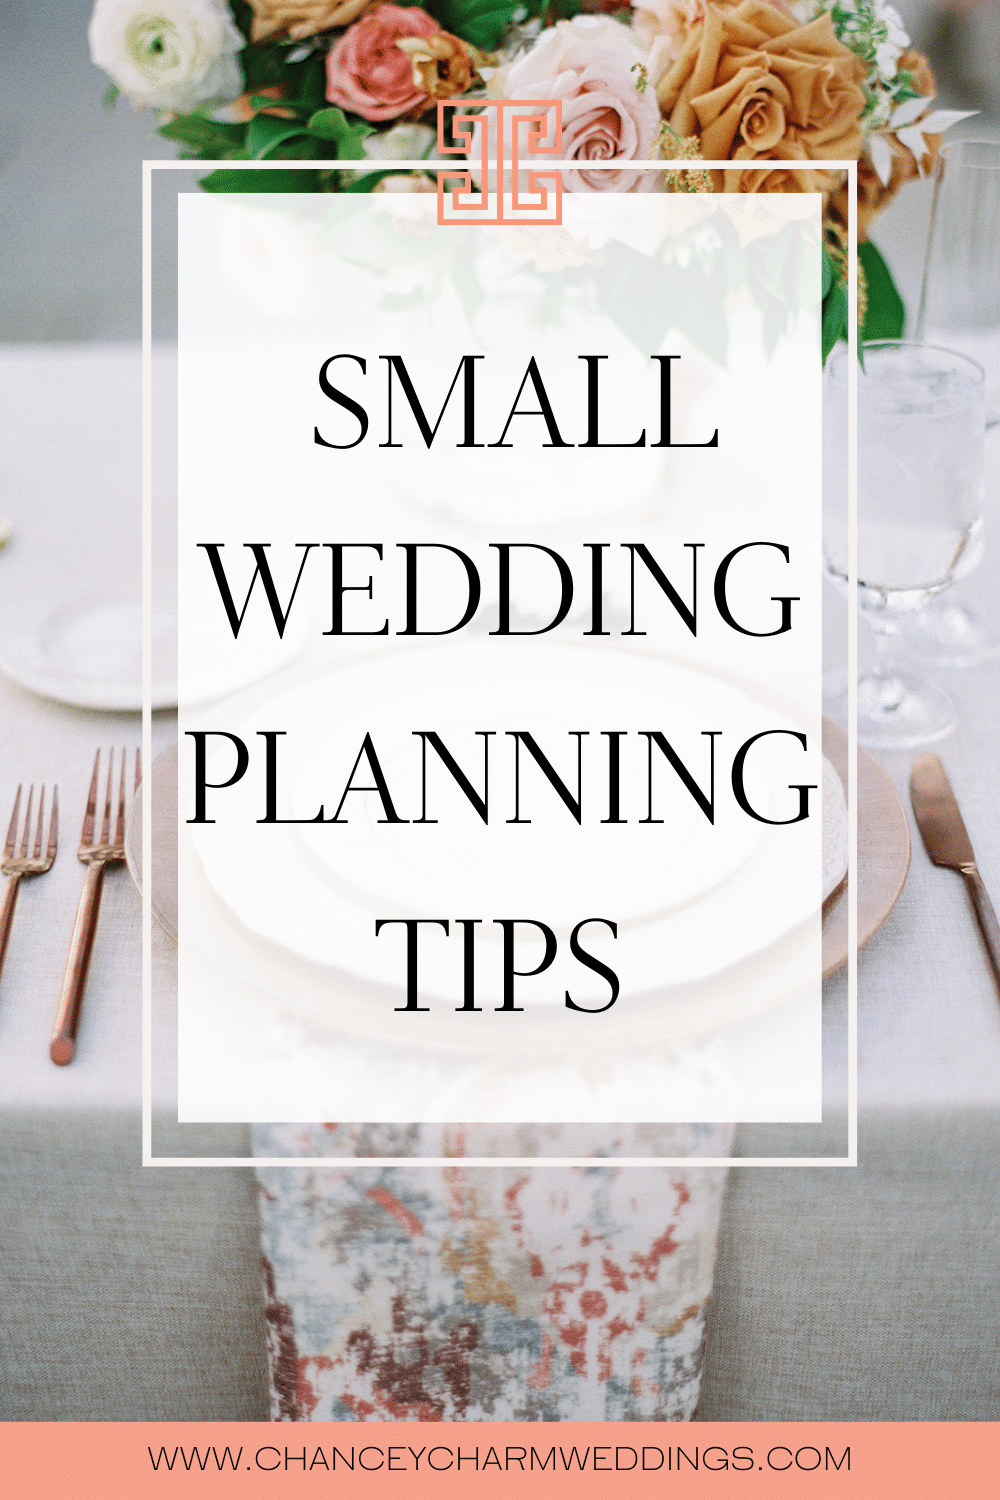 Planning A Small Wedding? Read These Wedding Planning Tips!